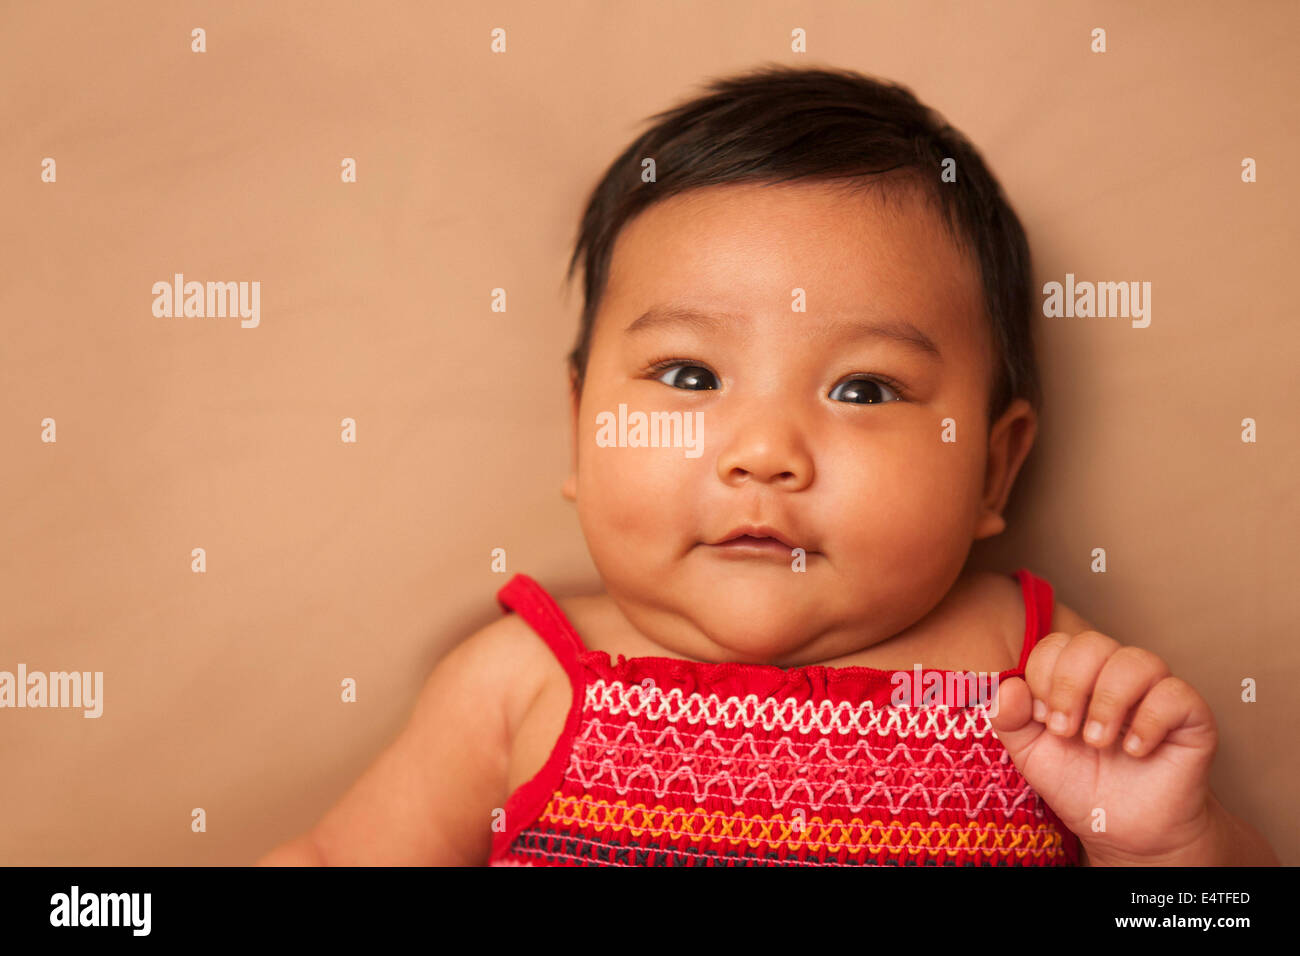 Close-up portrait of Asian baby lying on back, wearing red dress, looking at camera and smiling, studio shot on brown background Stock Photo